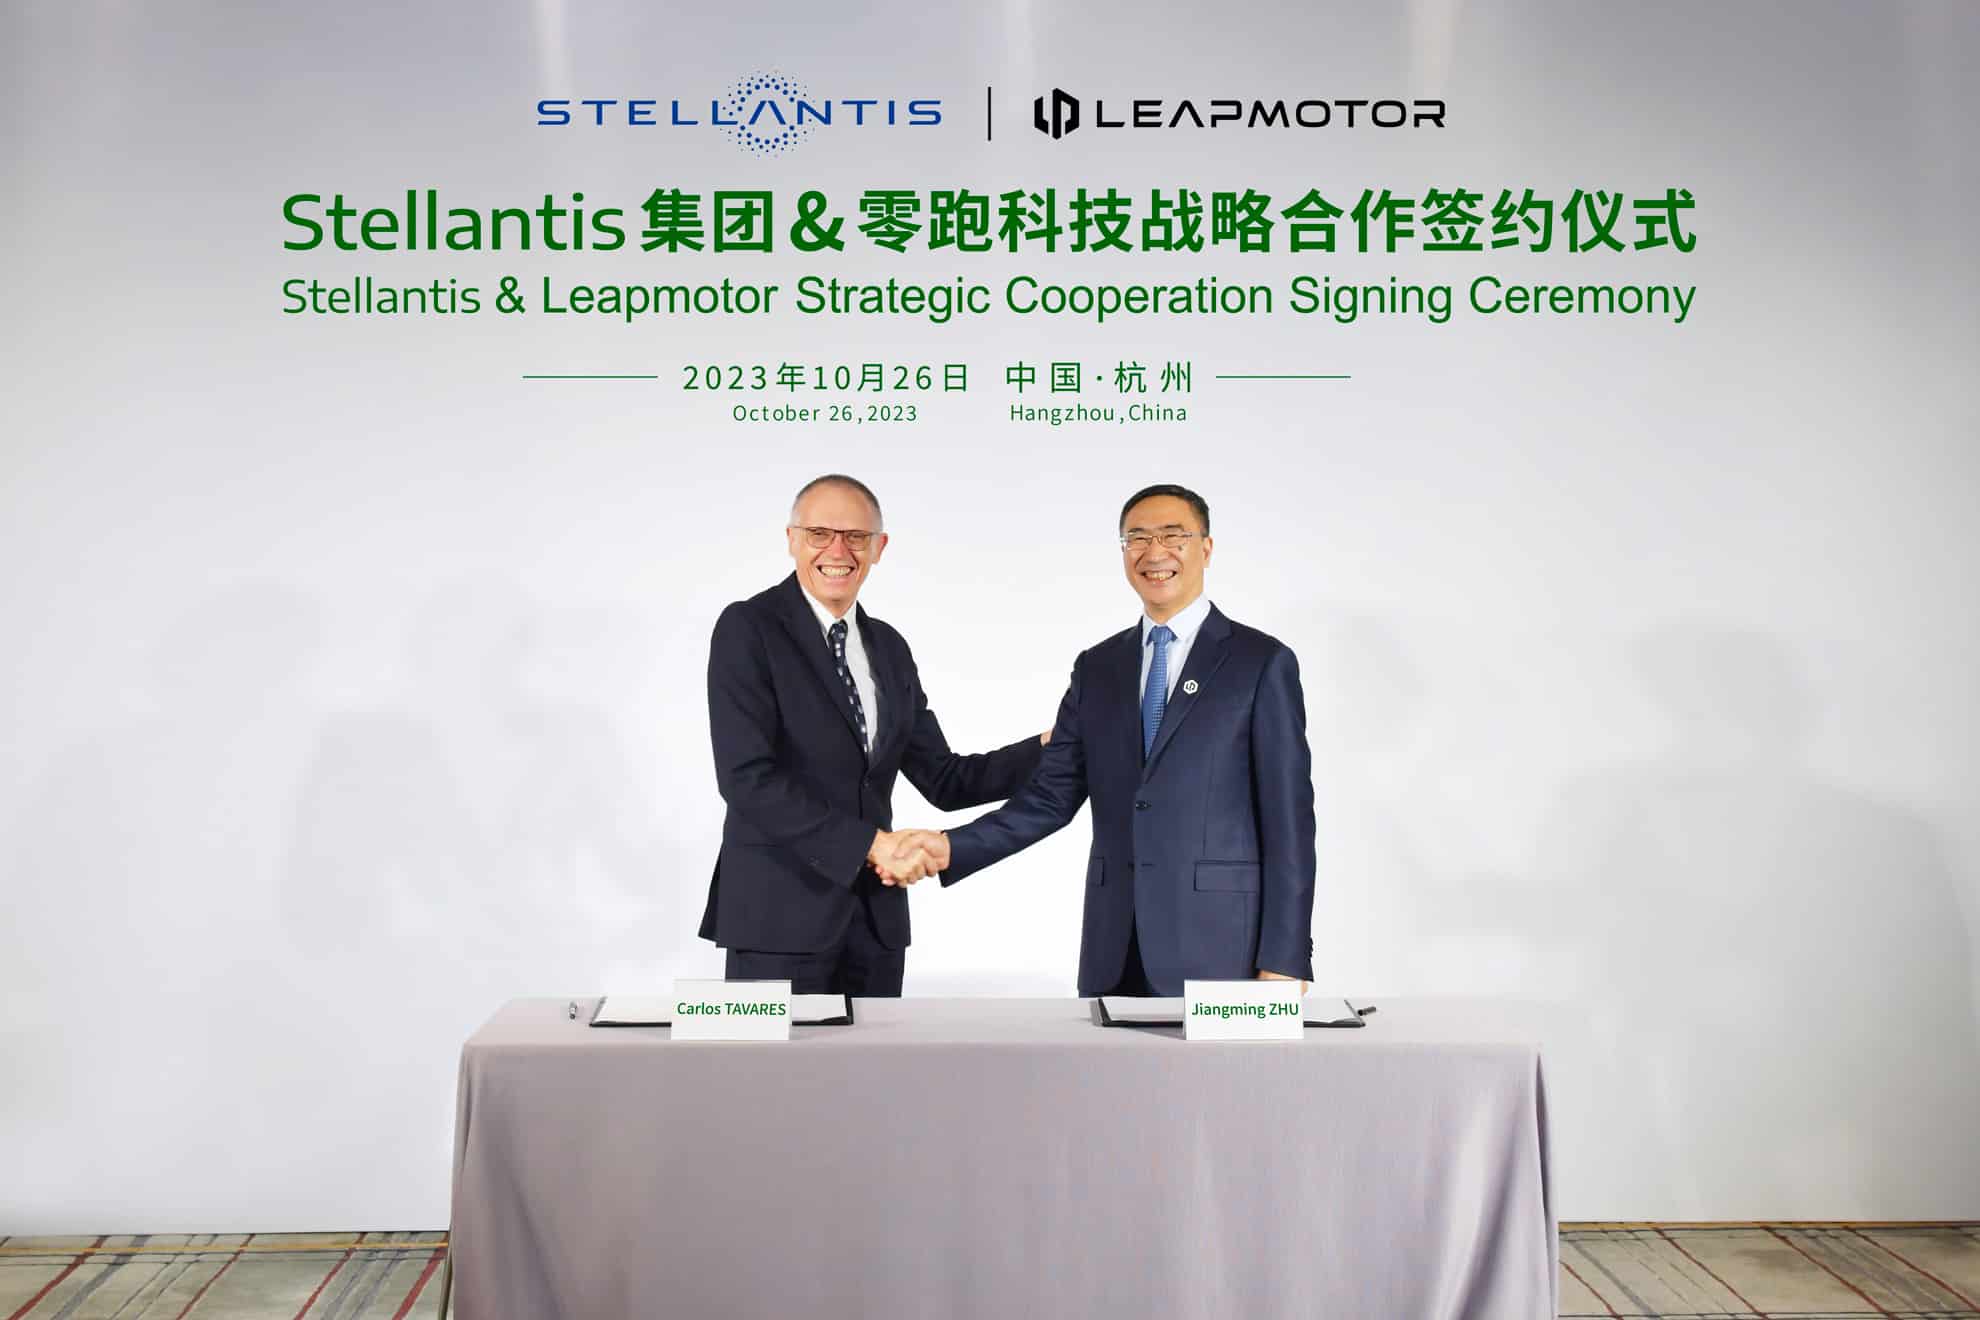 Stellantis to acquire 20% of Leapmotor in €1.5 billion deal